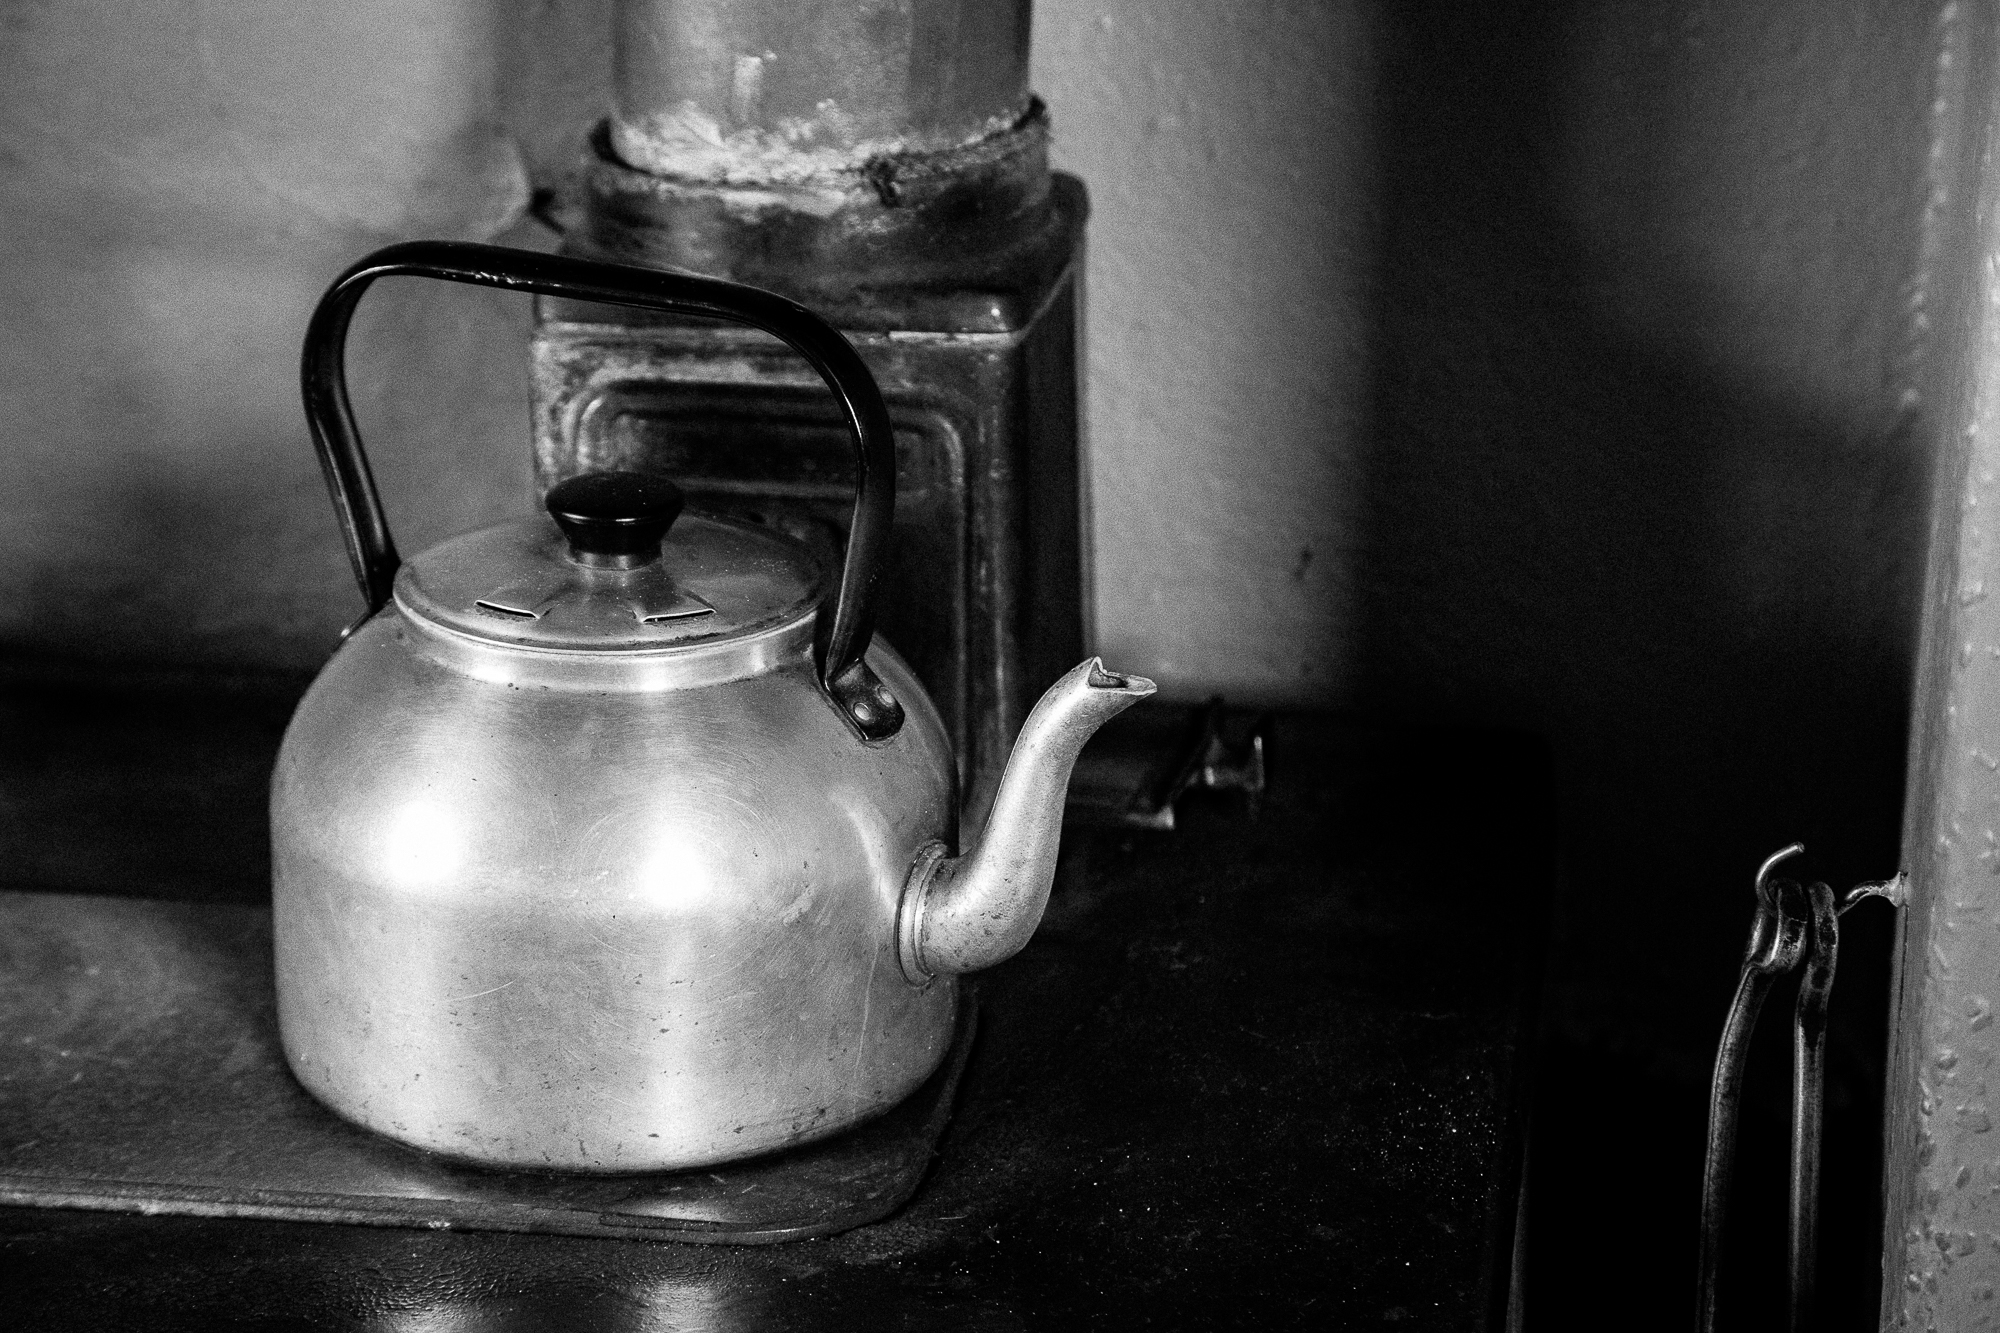 An old beloved kettle still pouring hot water to make a perfect cuppa